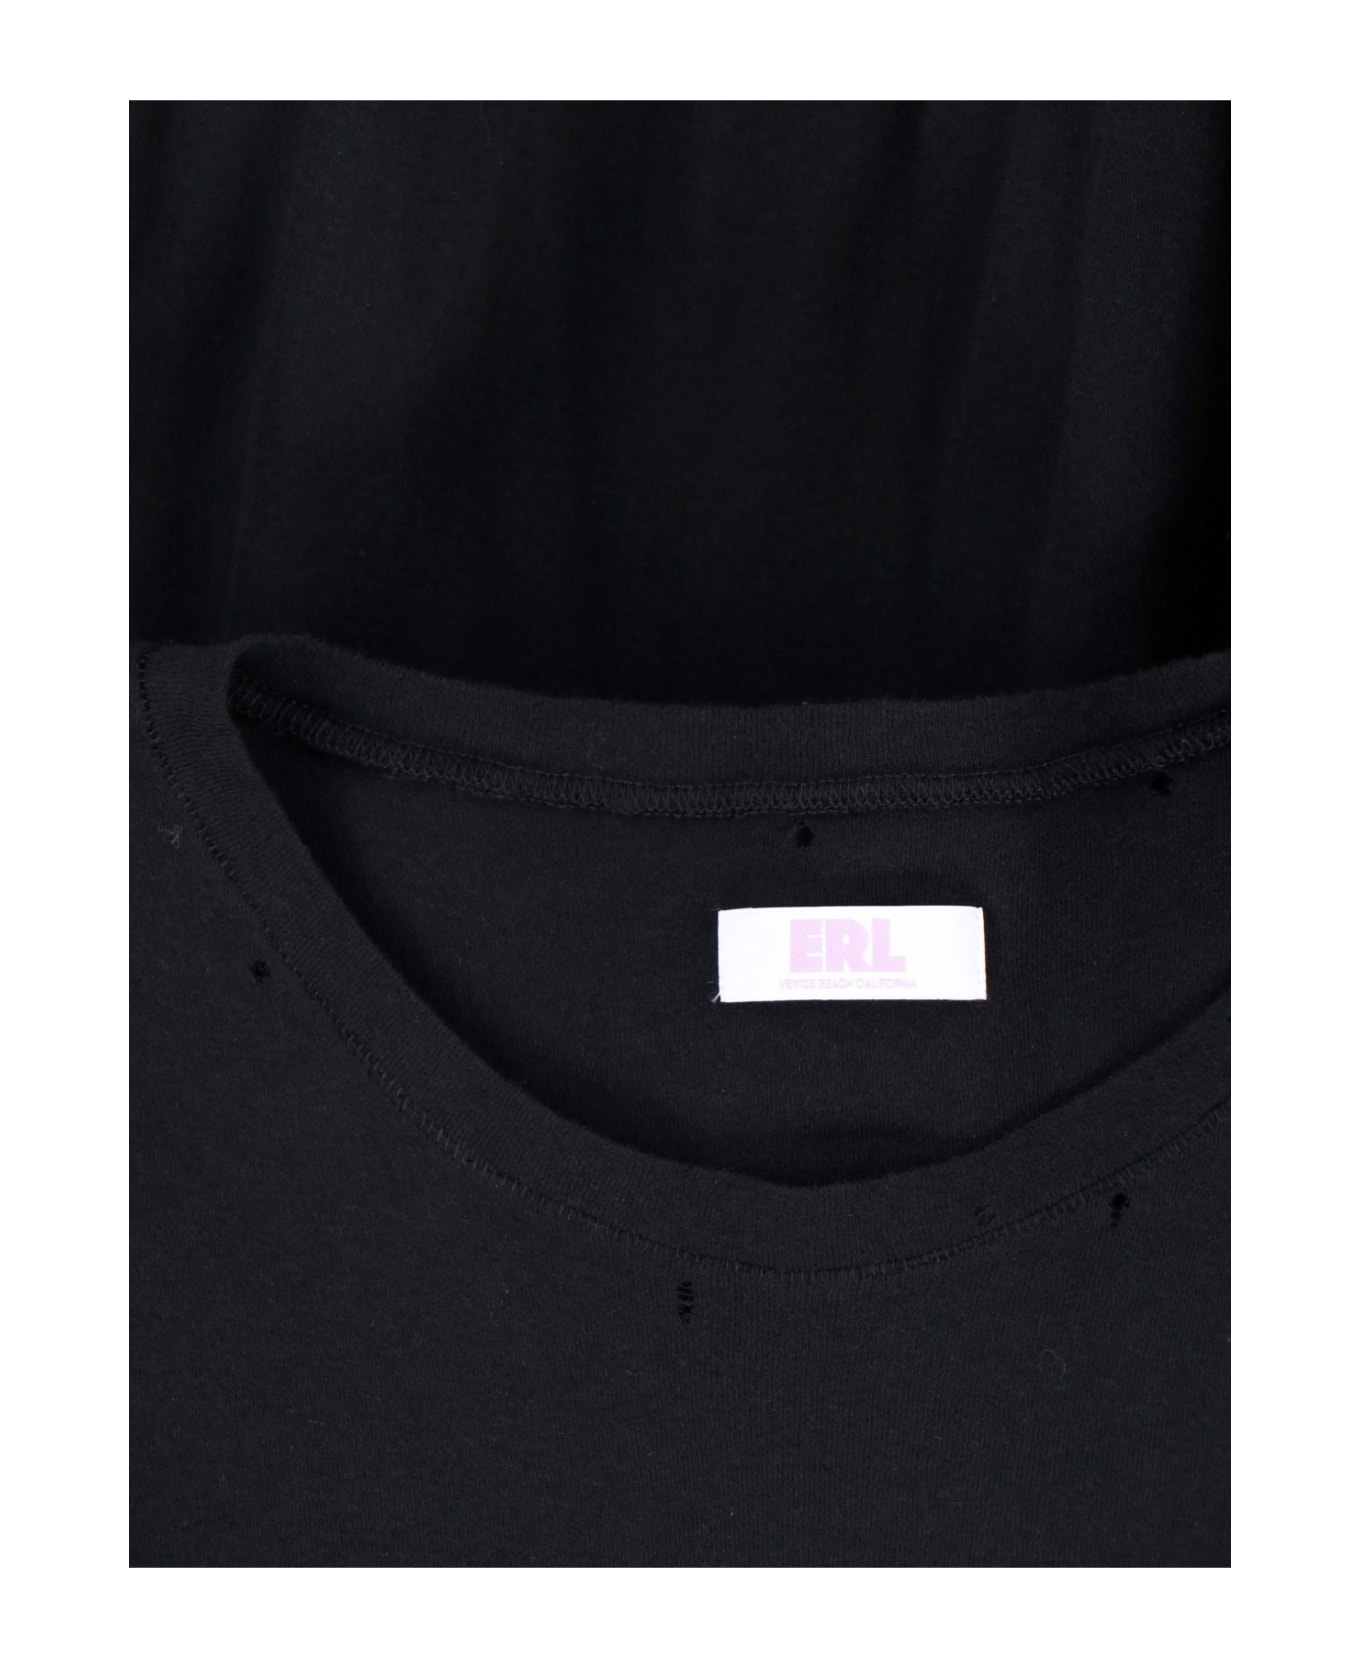 ERL 'baby' T-shirt - Faded Black シャツ